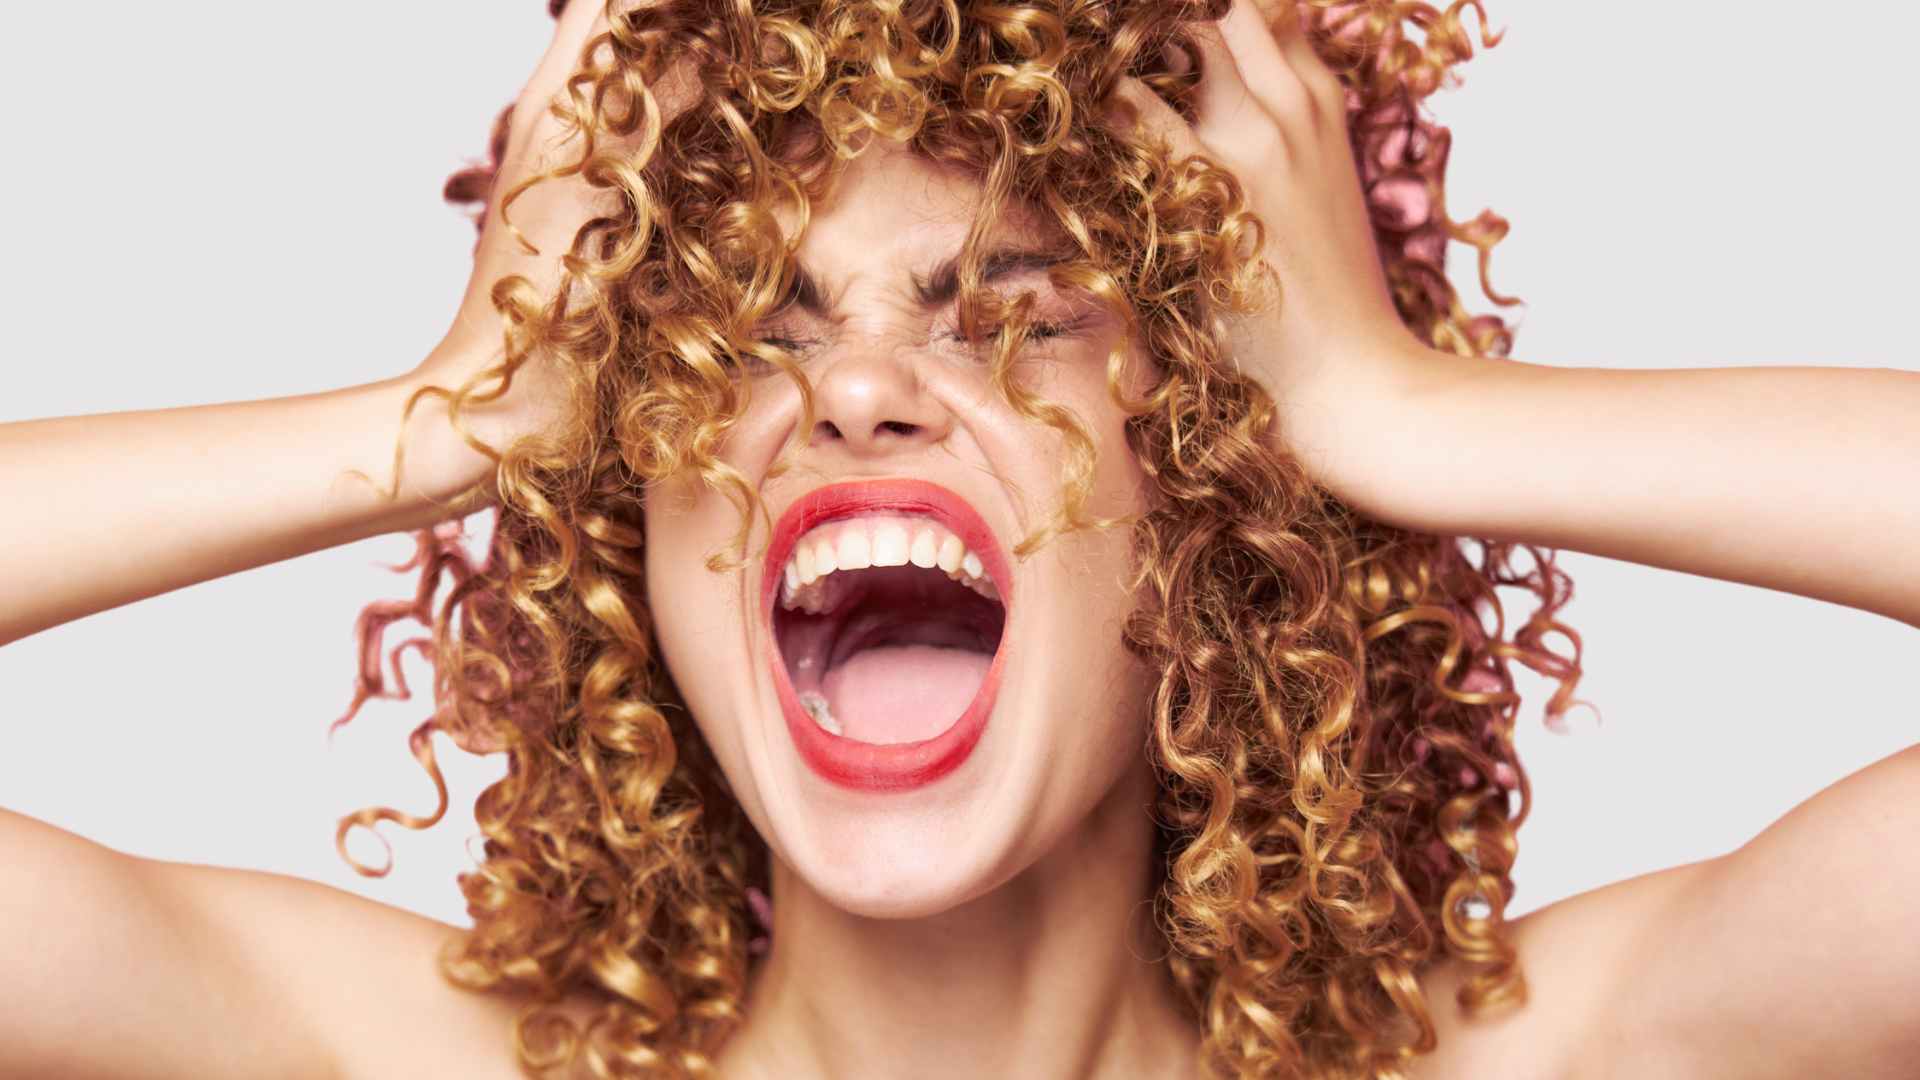 Damaged hair: Female with curly frizz free hair screaming with red lipstick